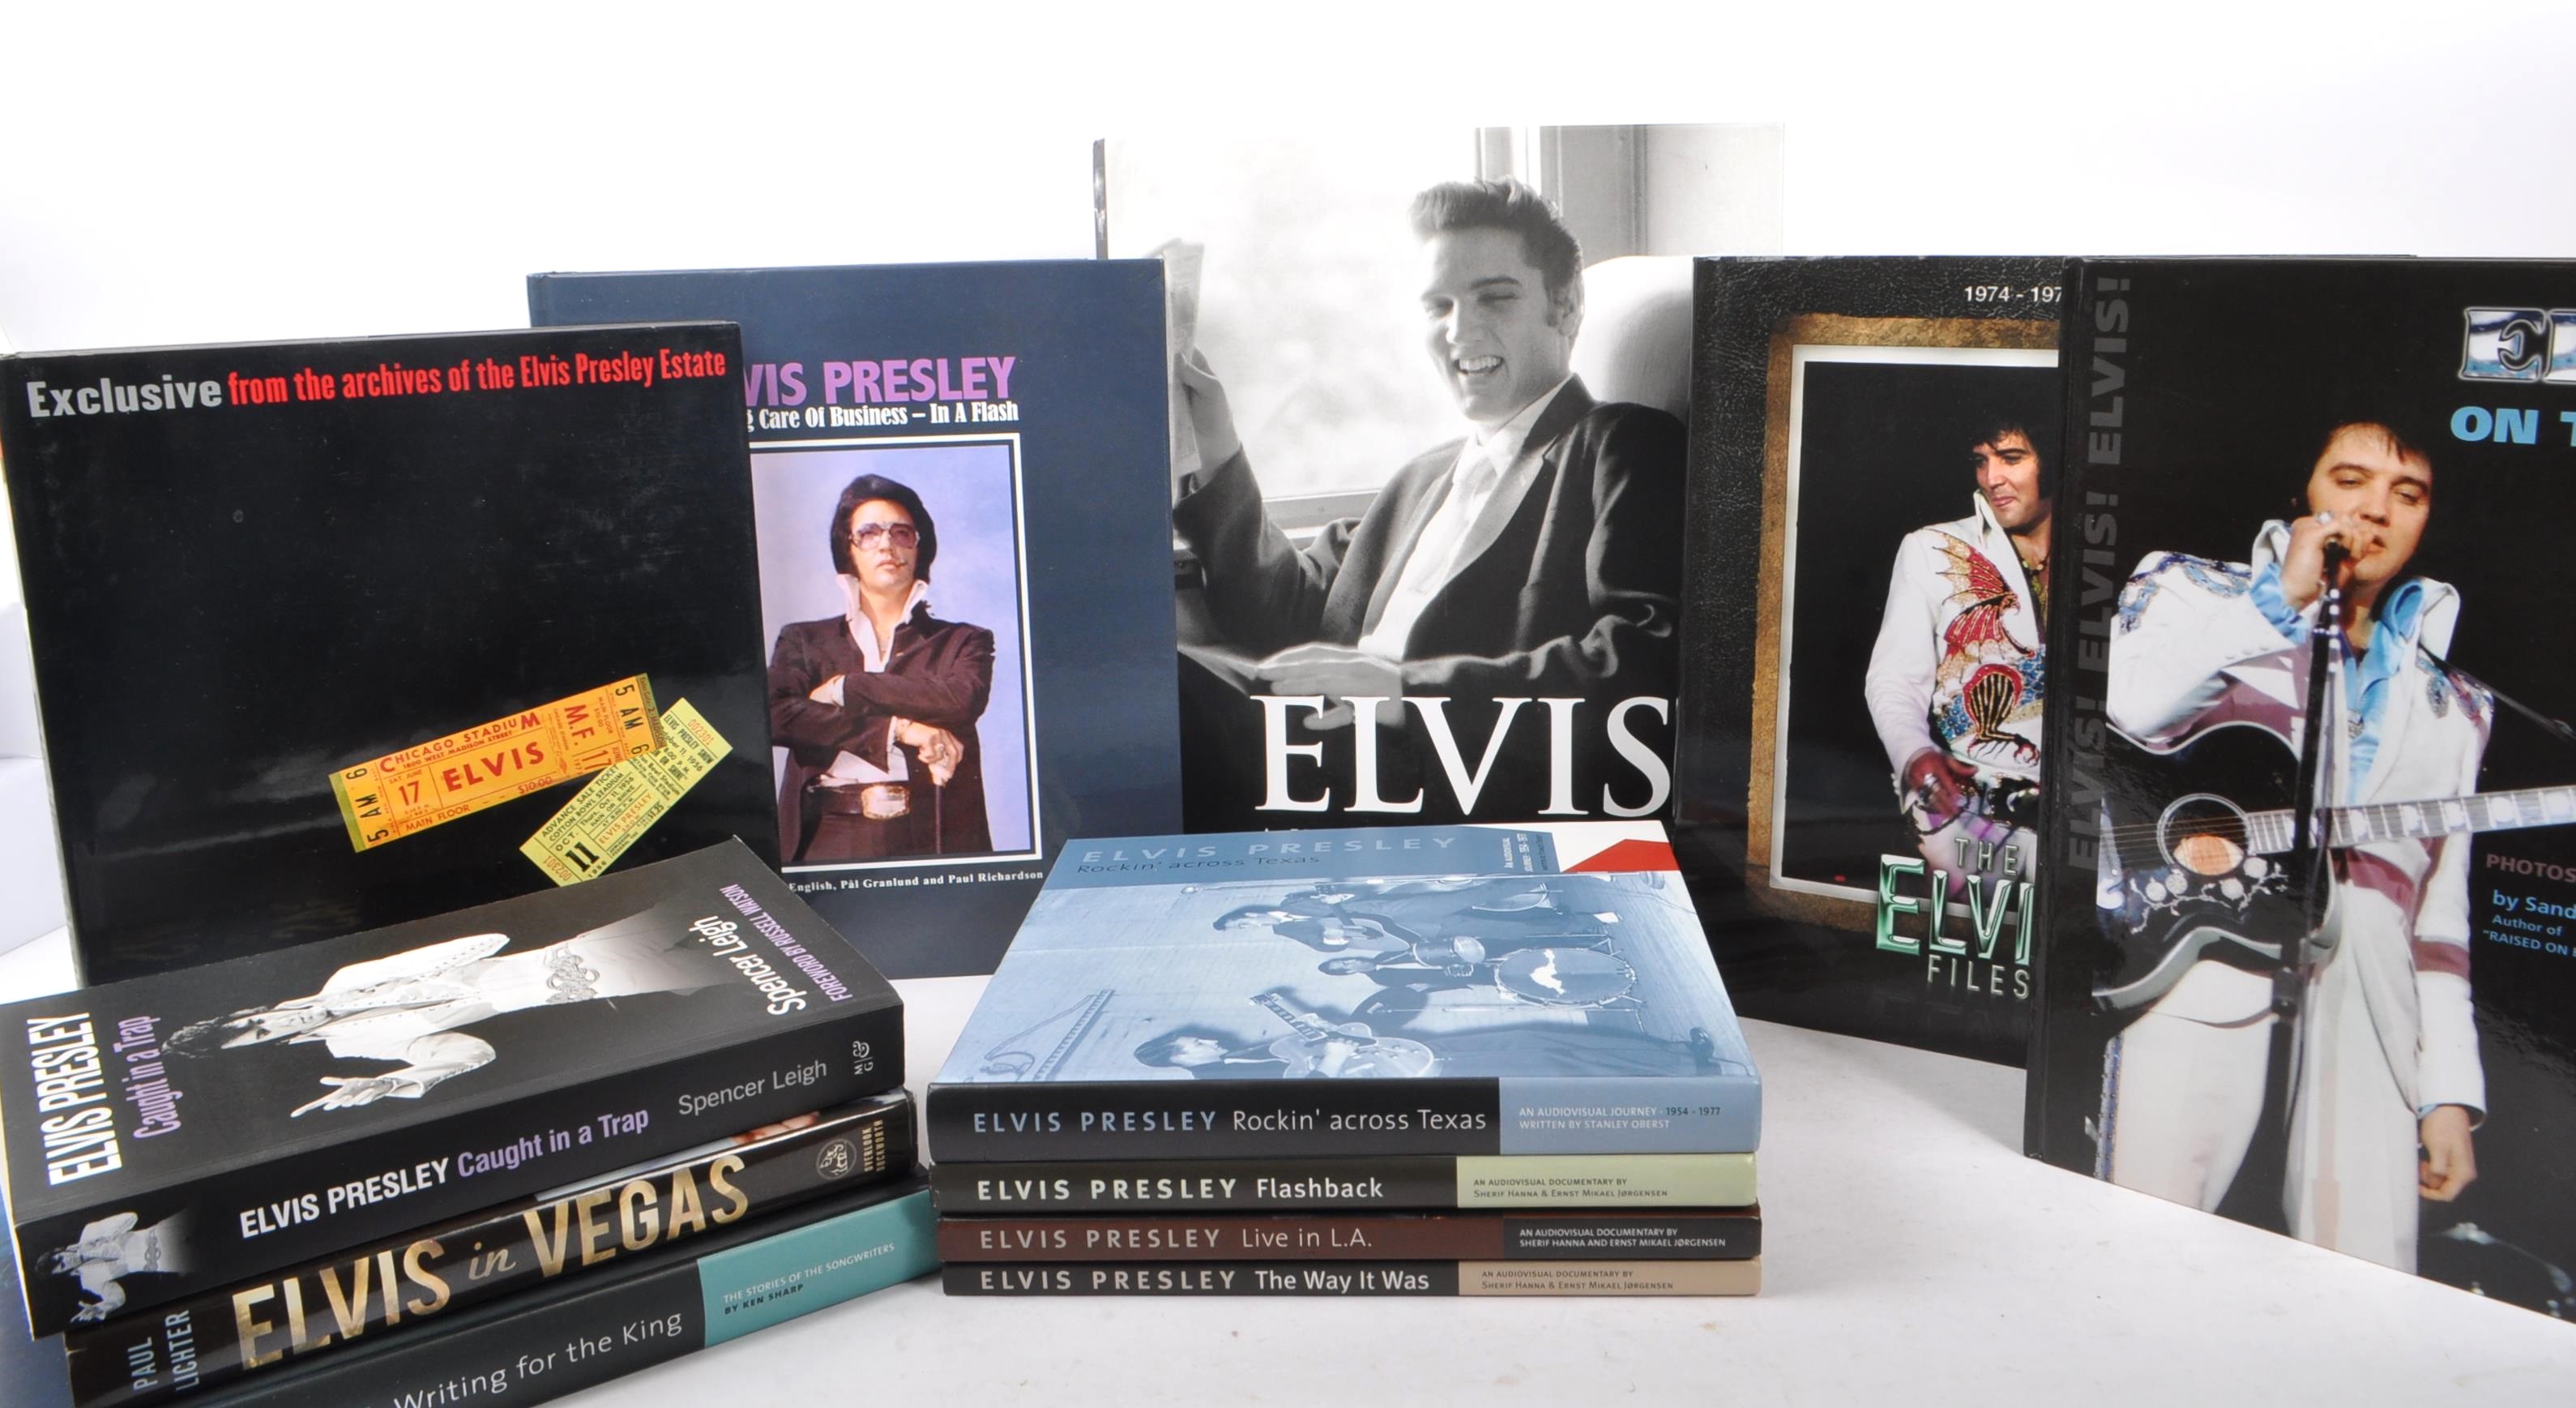 ELVIS PRESLEY - COLLECTION OF ROCK N ROLL MUSIC BOOKS